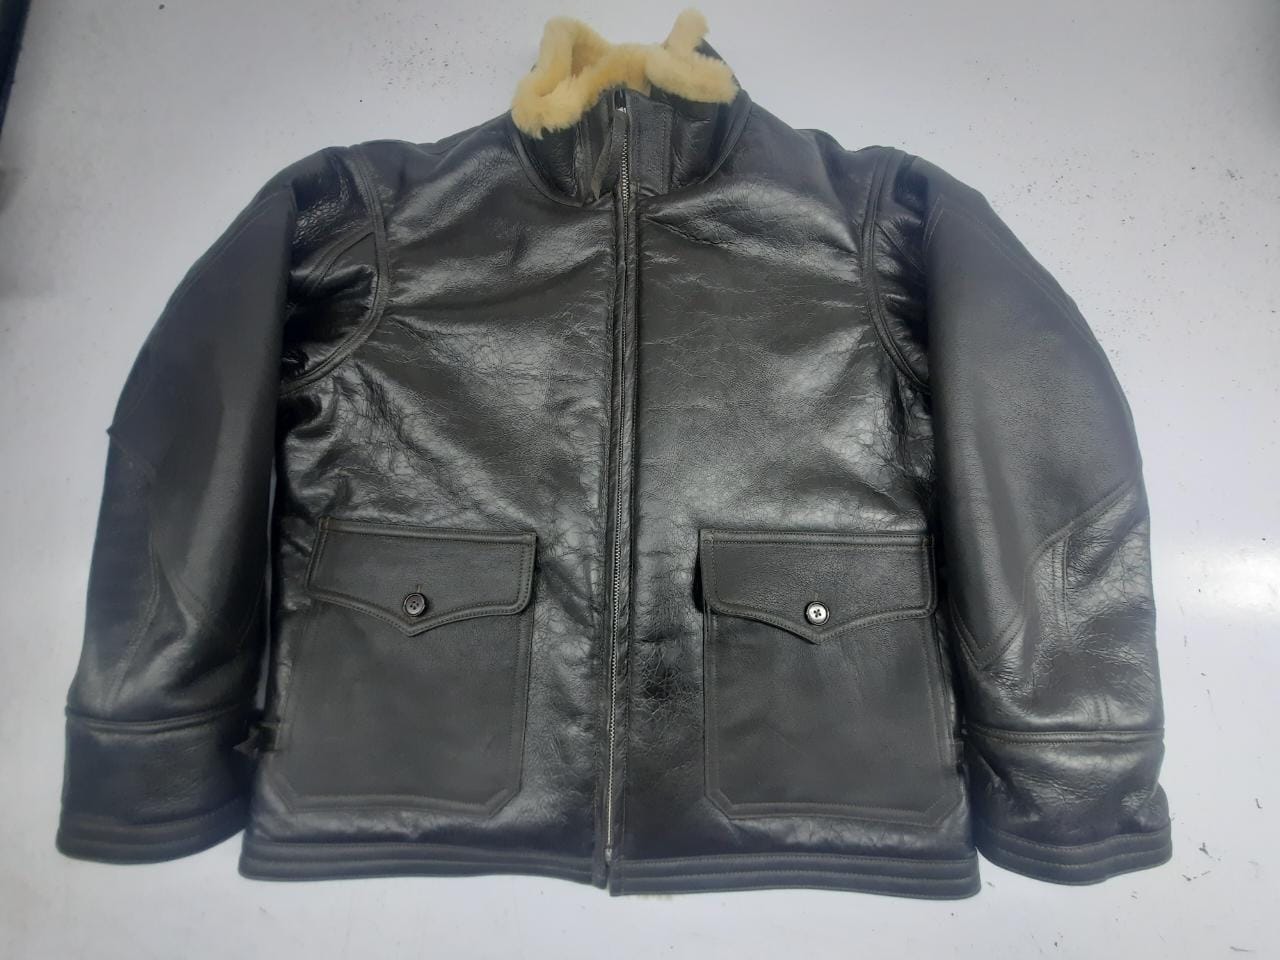 FiveStar Leather Reproduction of M444 Jacket | Page 3 | Vintage Leather ...